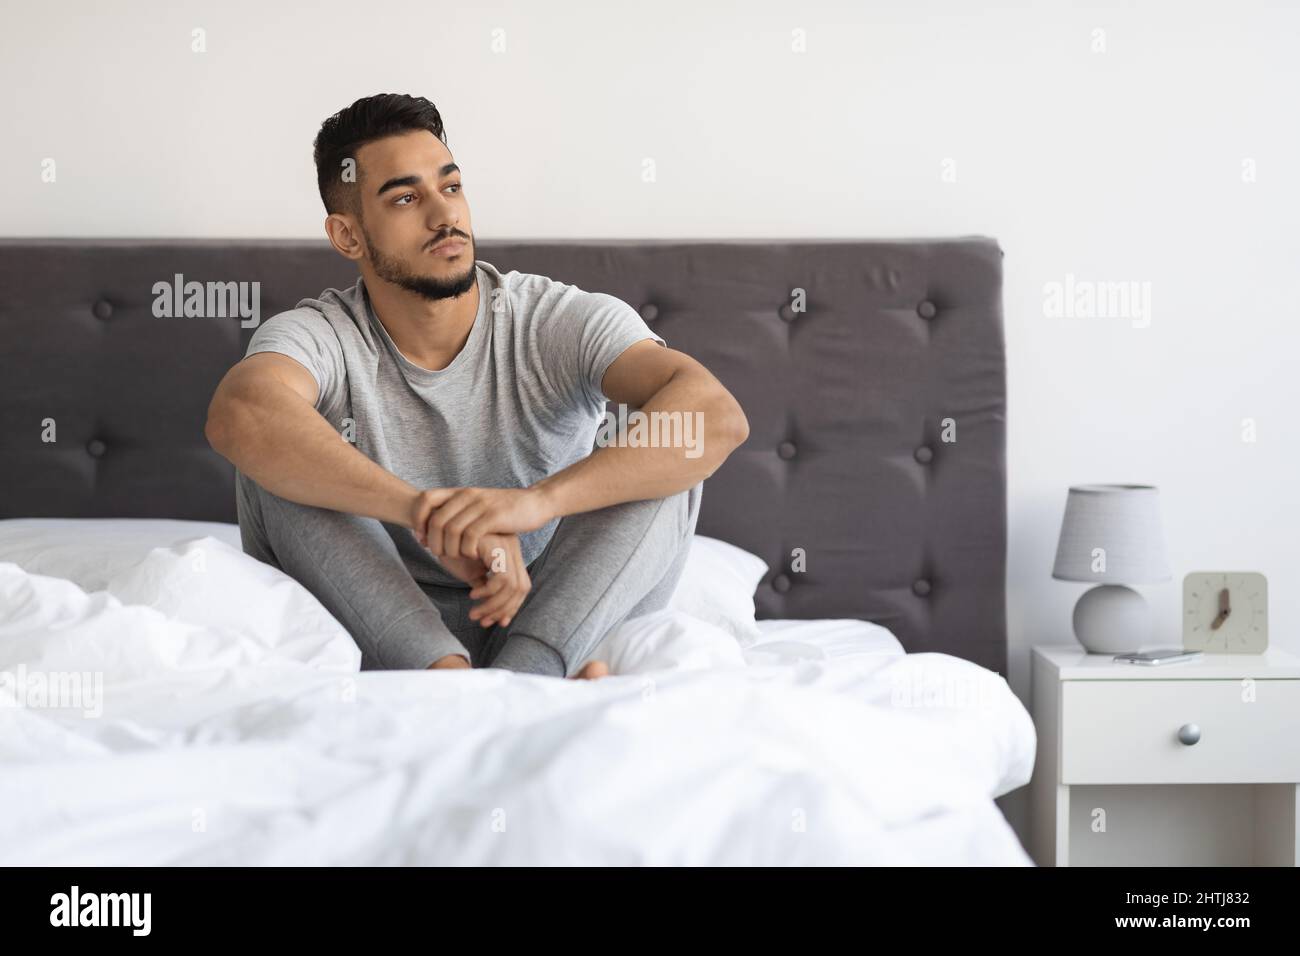 Portrait Of Thoughtful Young Arab Man Sitting On Bed And Looking Away Stock Photo